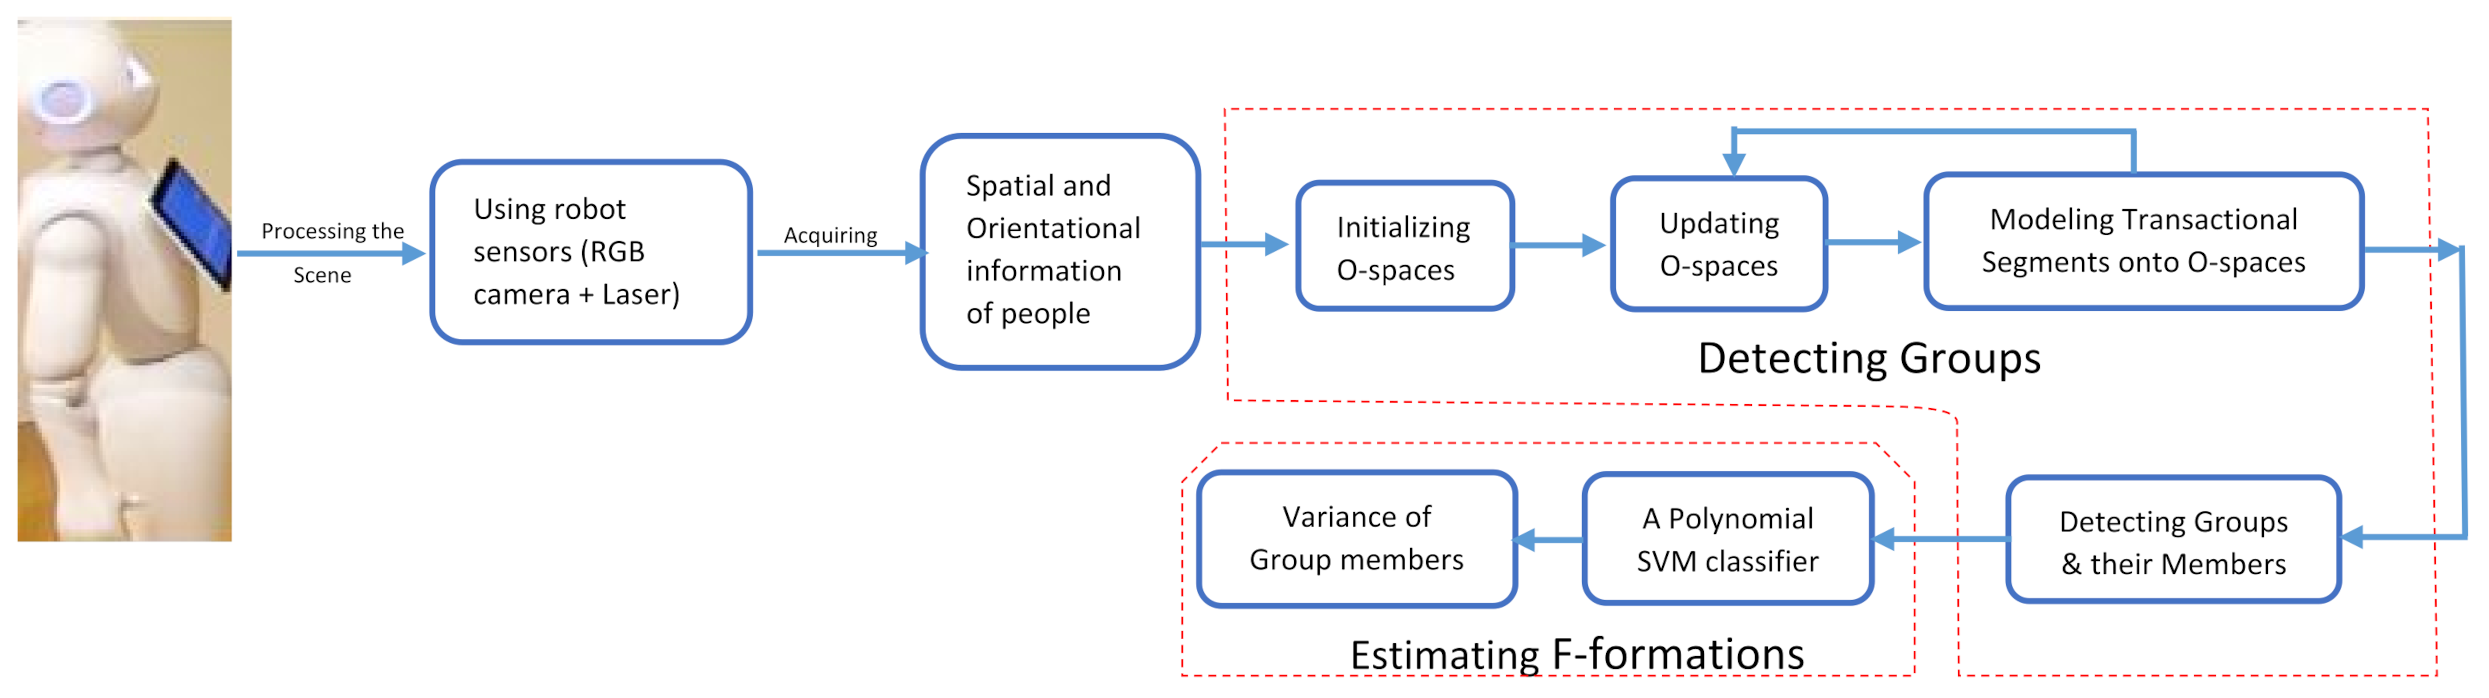 MTI | Free | Detecting Groups and Estimating F-Formations for Social Human&ndash;Robot Interactions